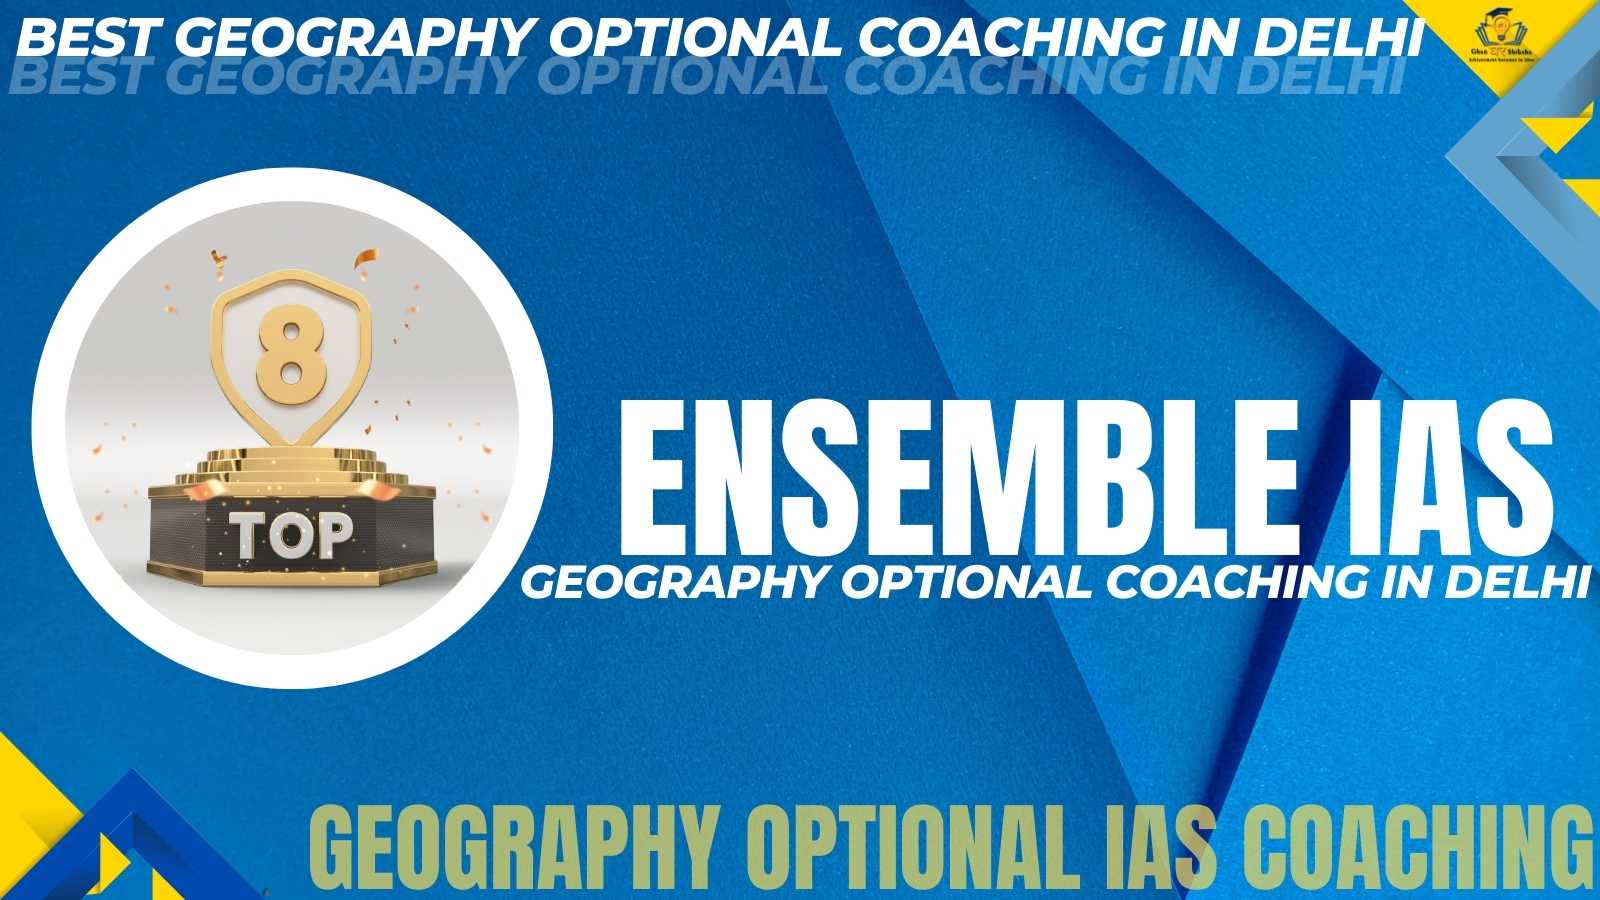 Geography Optional Coaching In Delhi